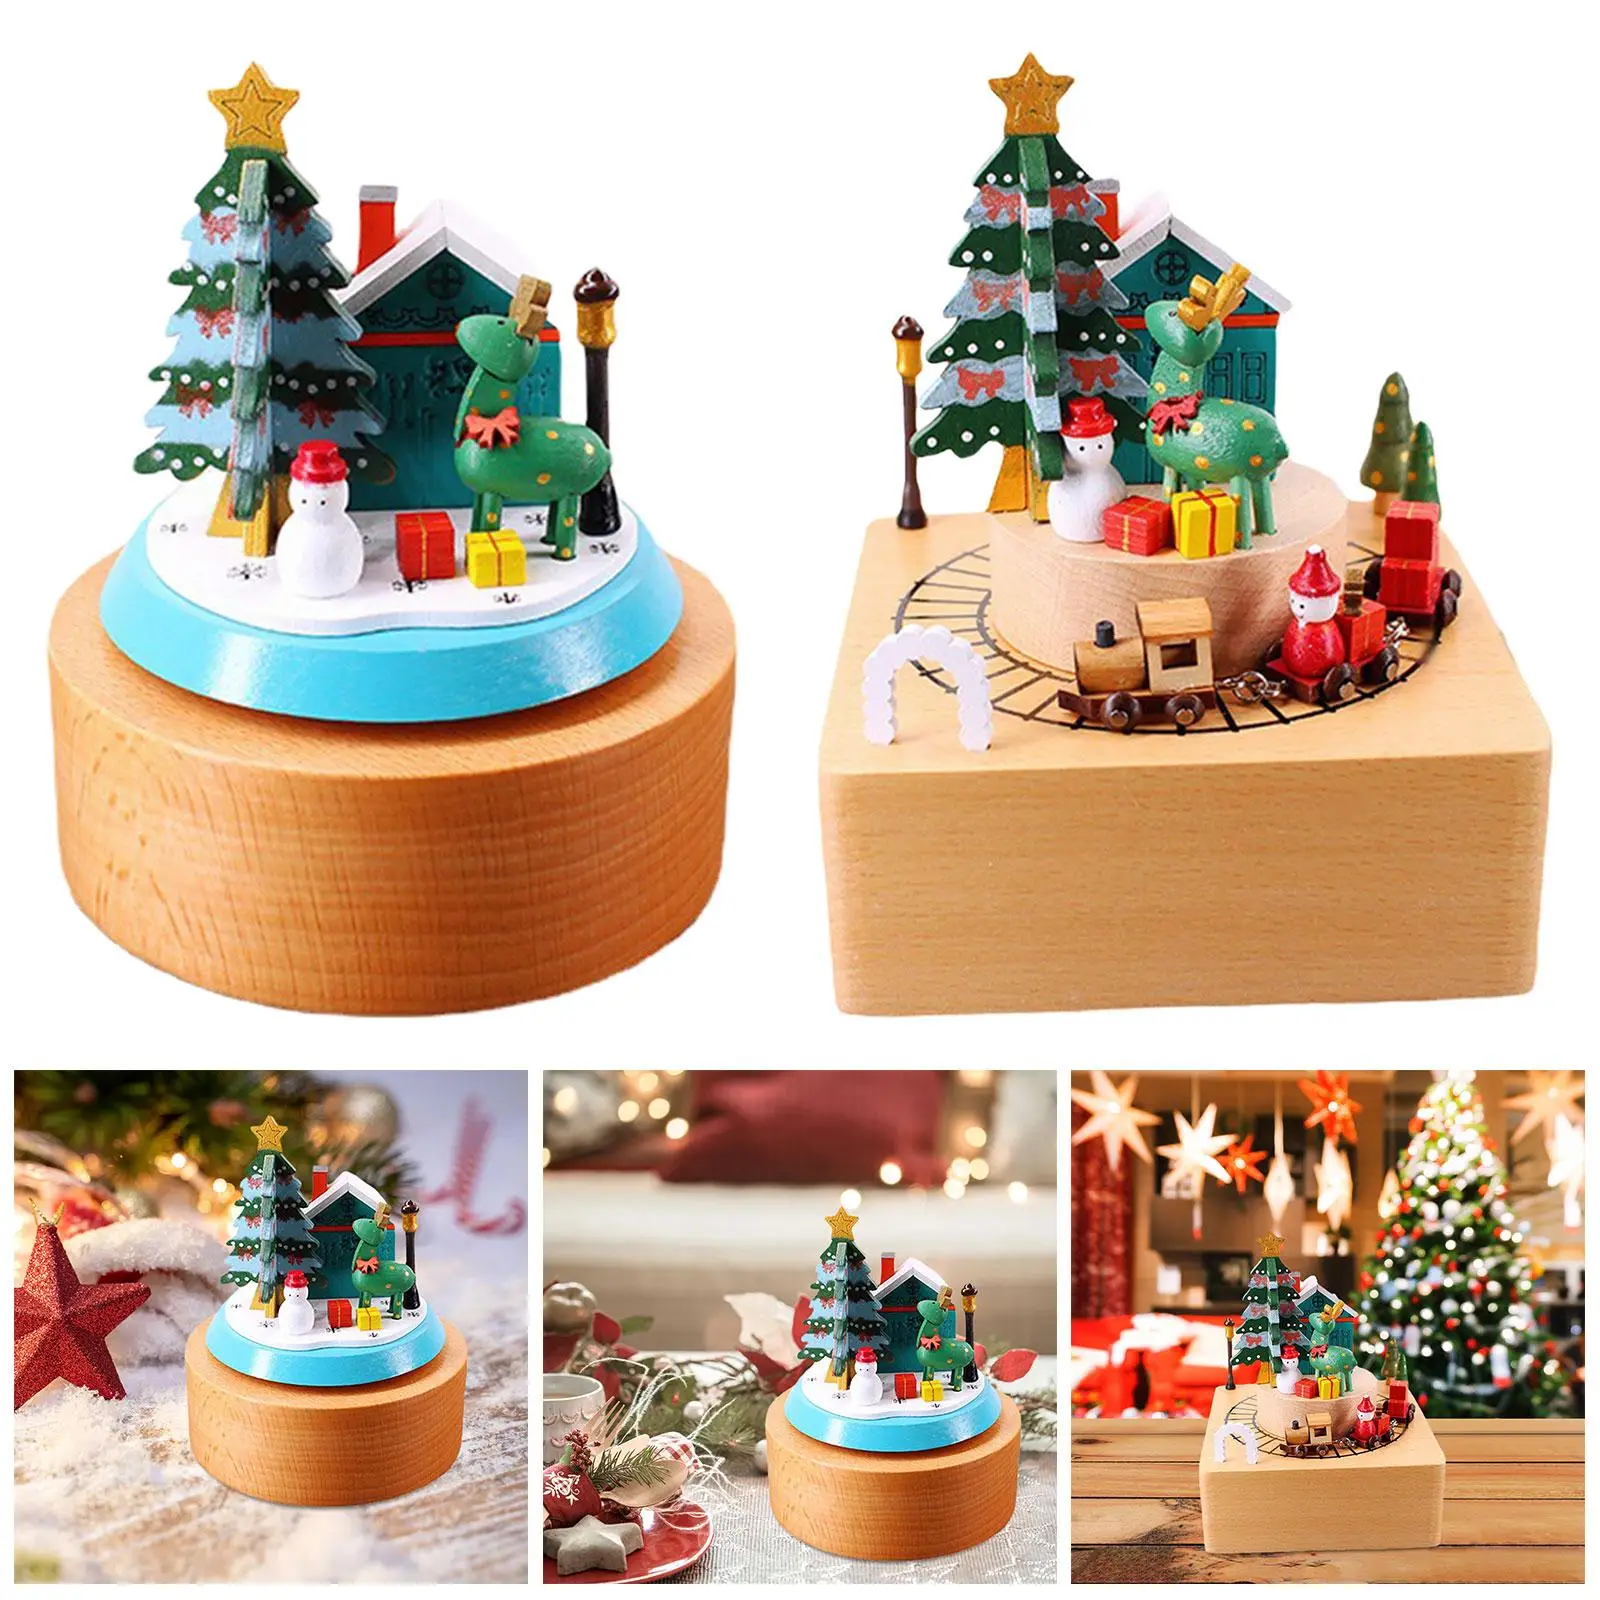 Christmas Musical Boxes Play Merry Christmas Song with Revolving Dolls Creative for Children Holiday Gift Decoration